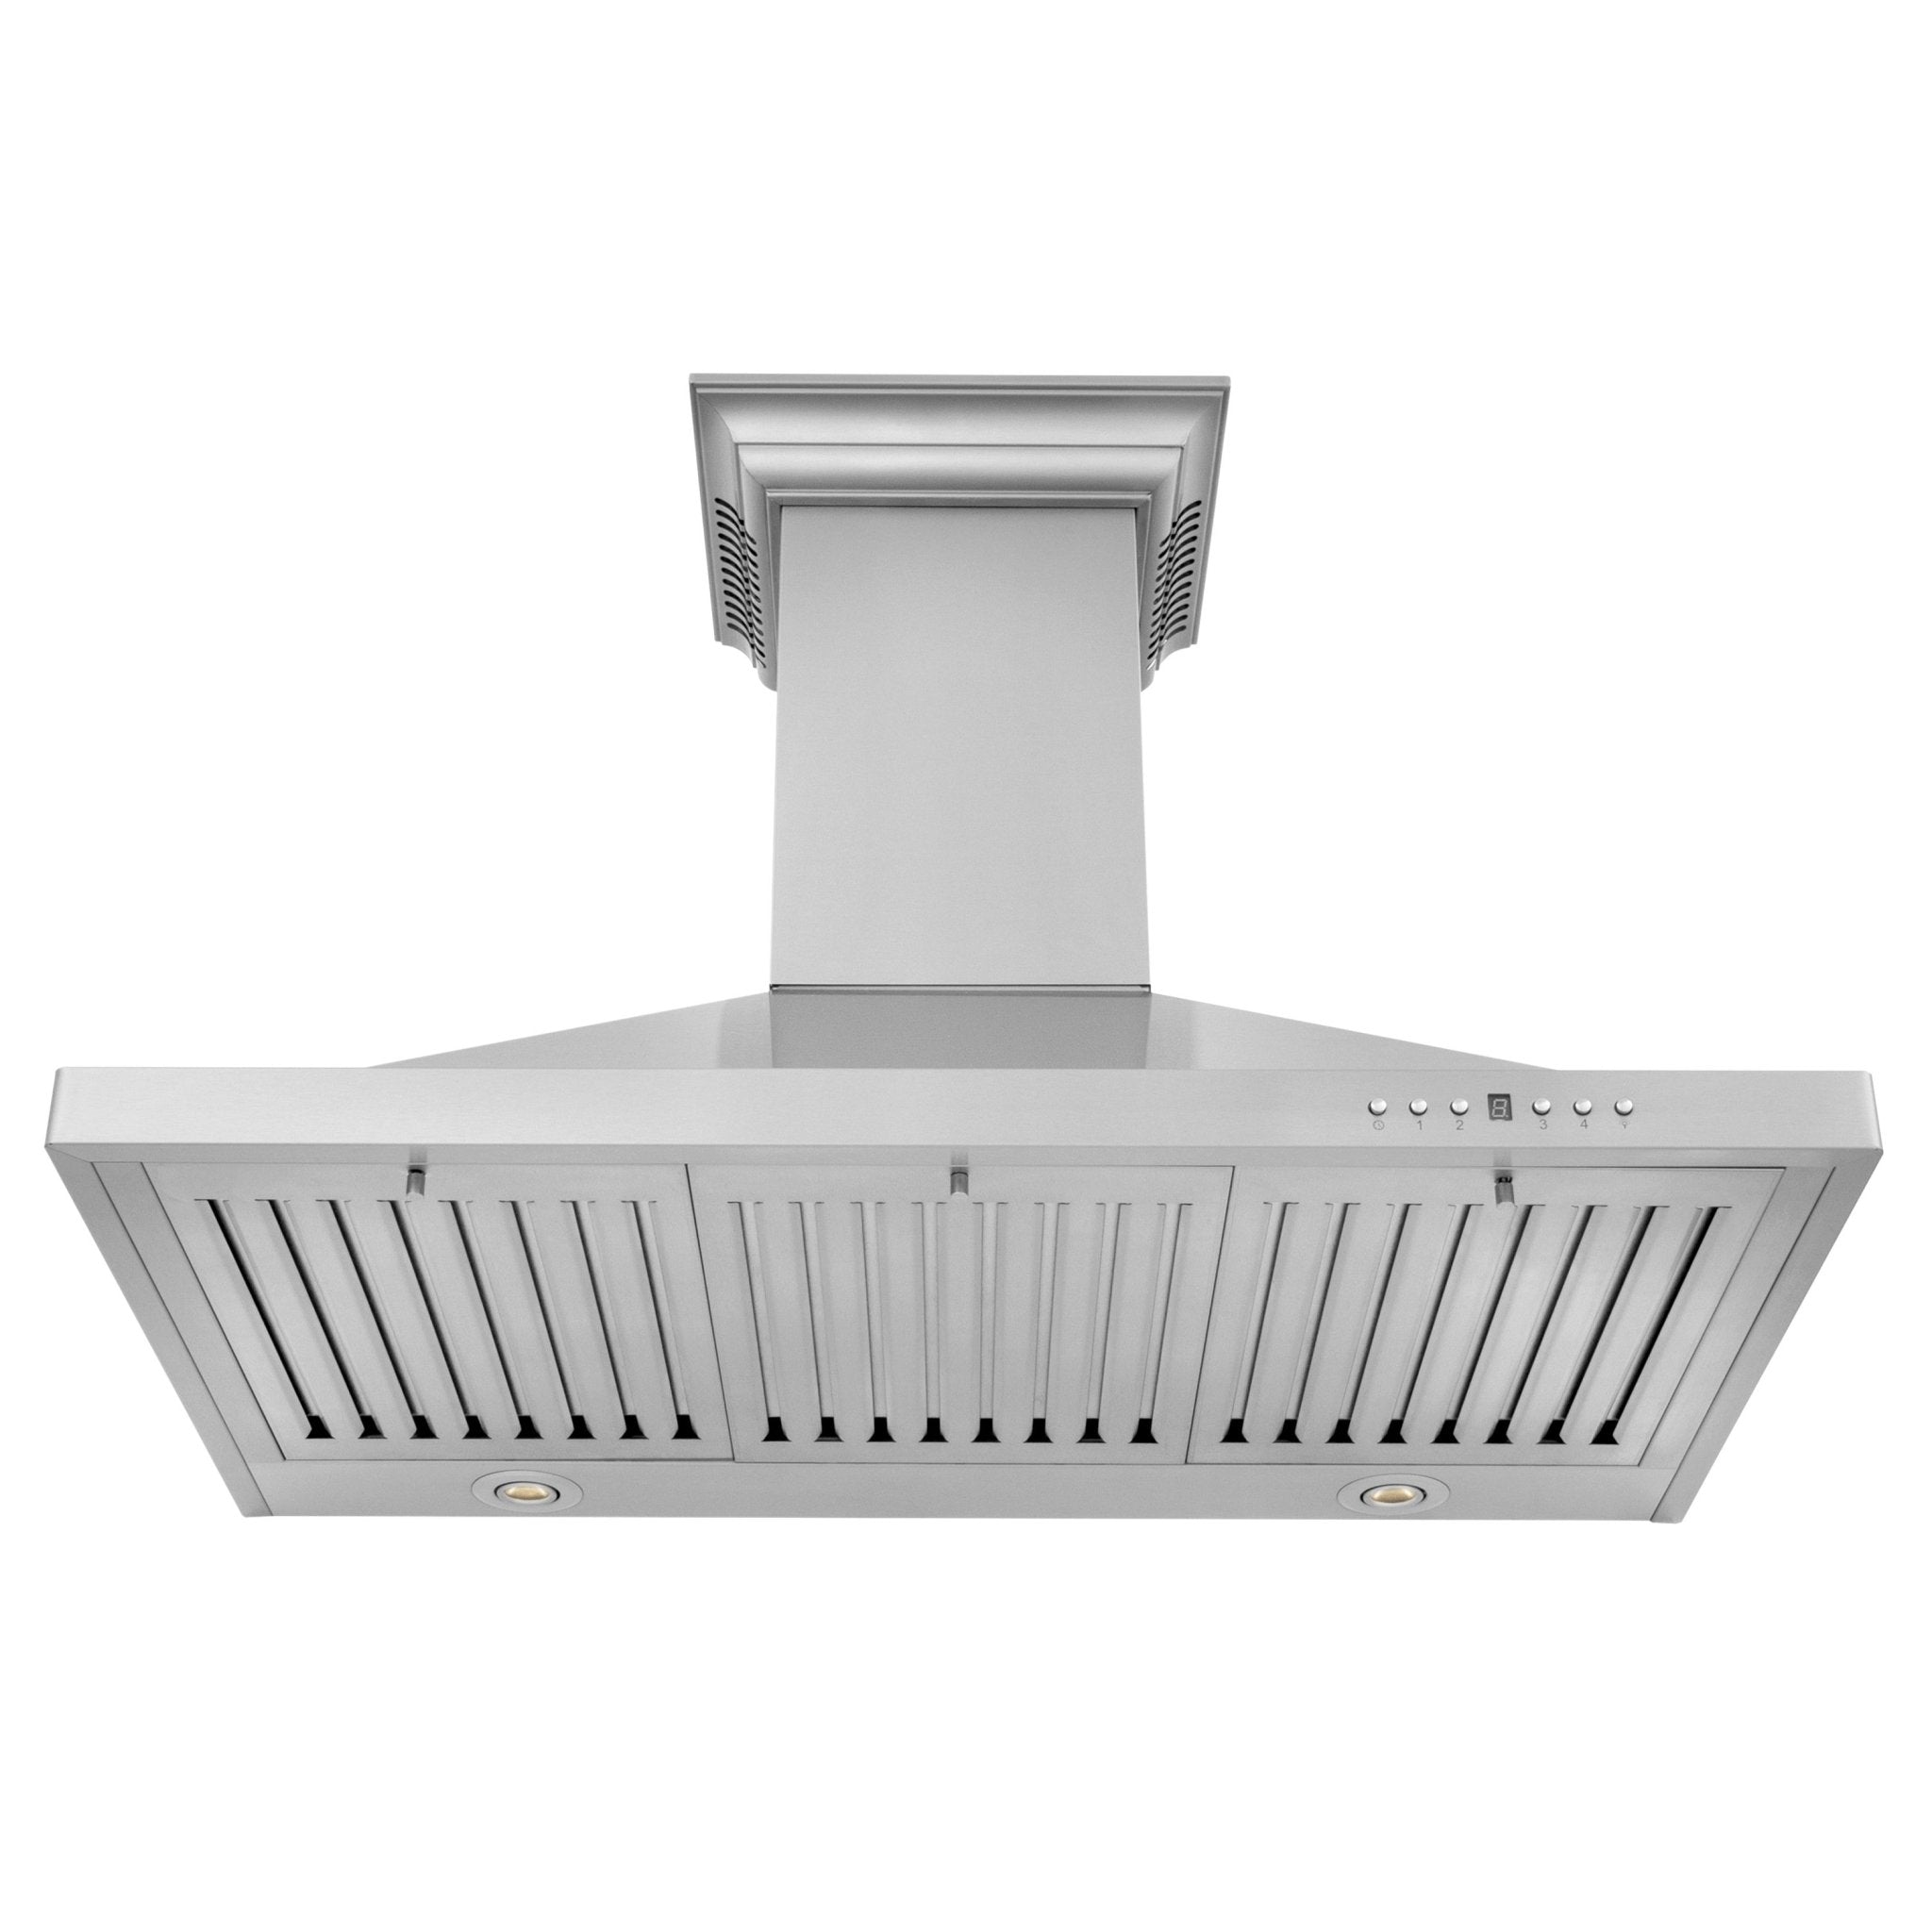 24" ZLINE CrownSound‚ Ducted Vent Wall Mount Range Hood in Stainless Steel with Built-in Bluetooth Speakers (KBCRN-BT-24)